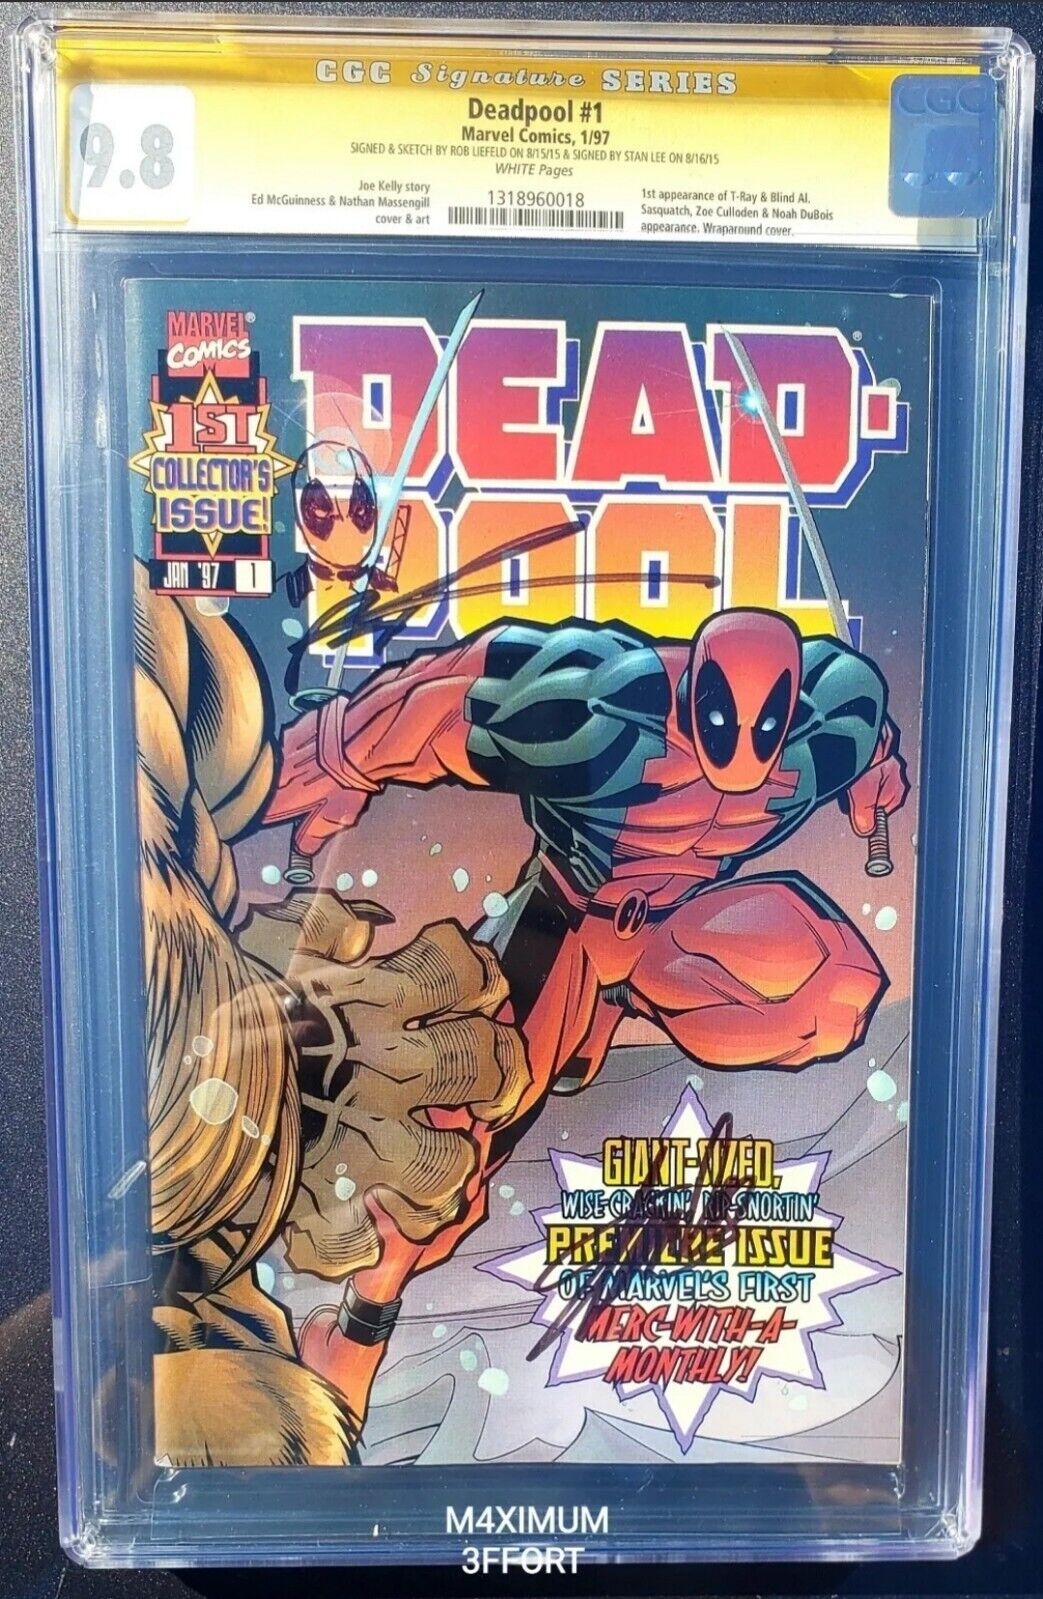 DEADPOOL #1 SIGNED STAN LEE AND ROB LEIFIELD CGC 9.8